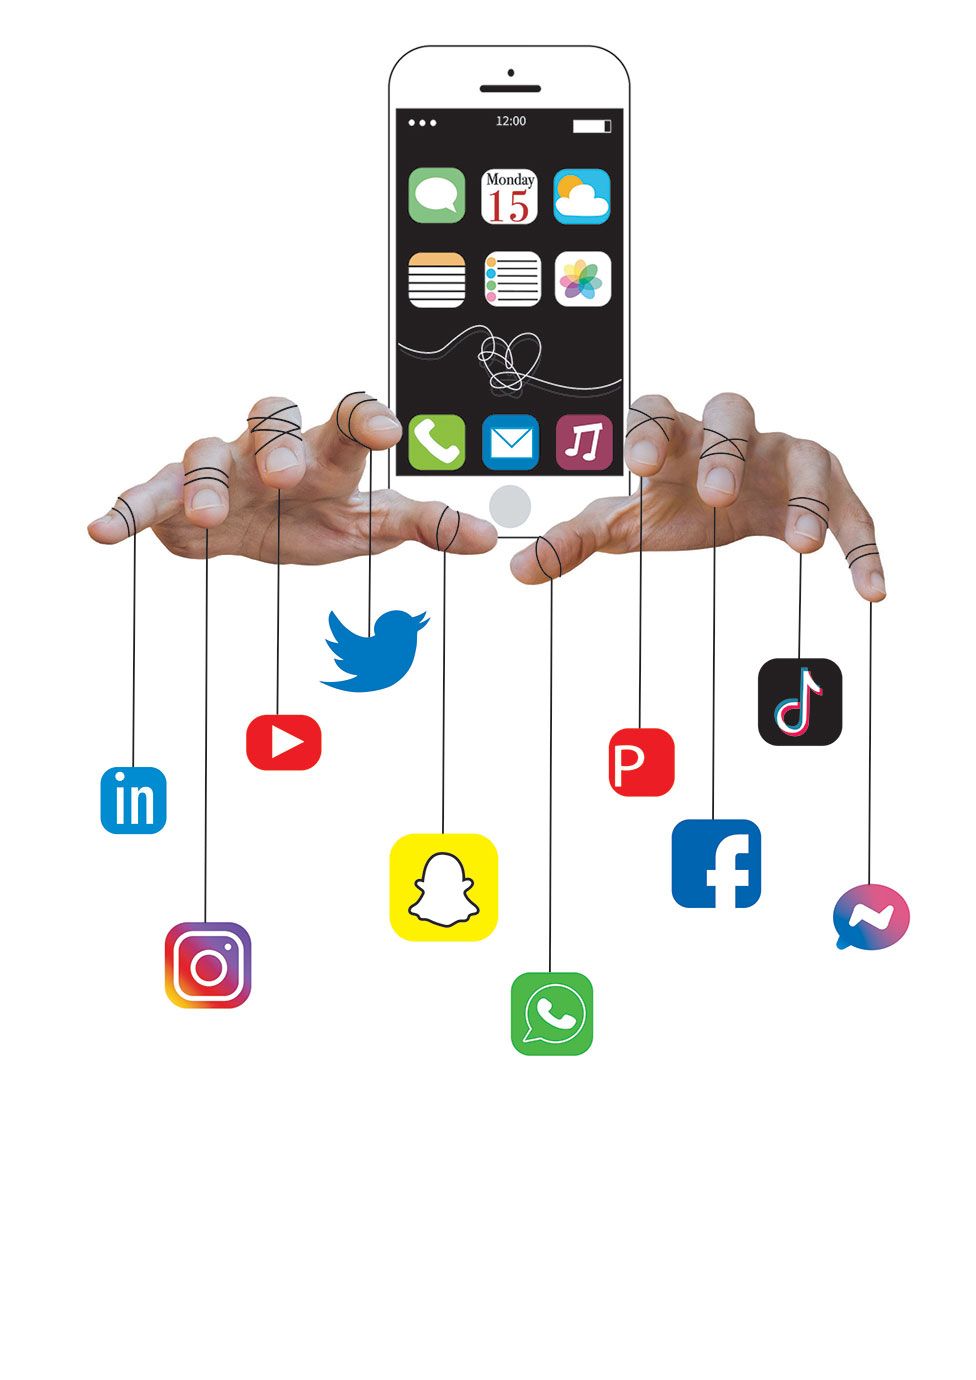 A piece of art showing a mobile phone and hands with social media icons dangling from string